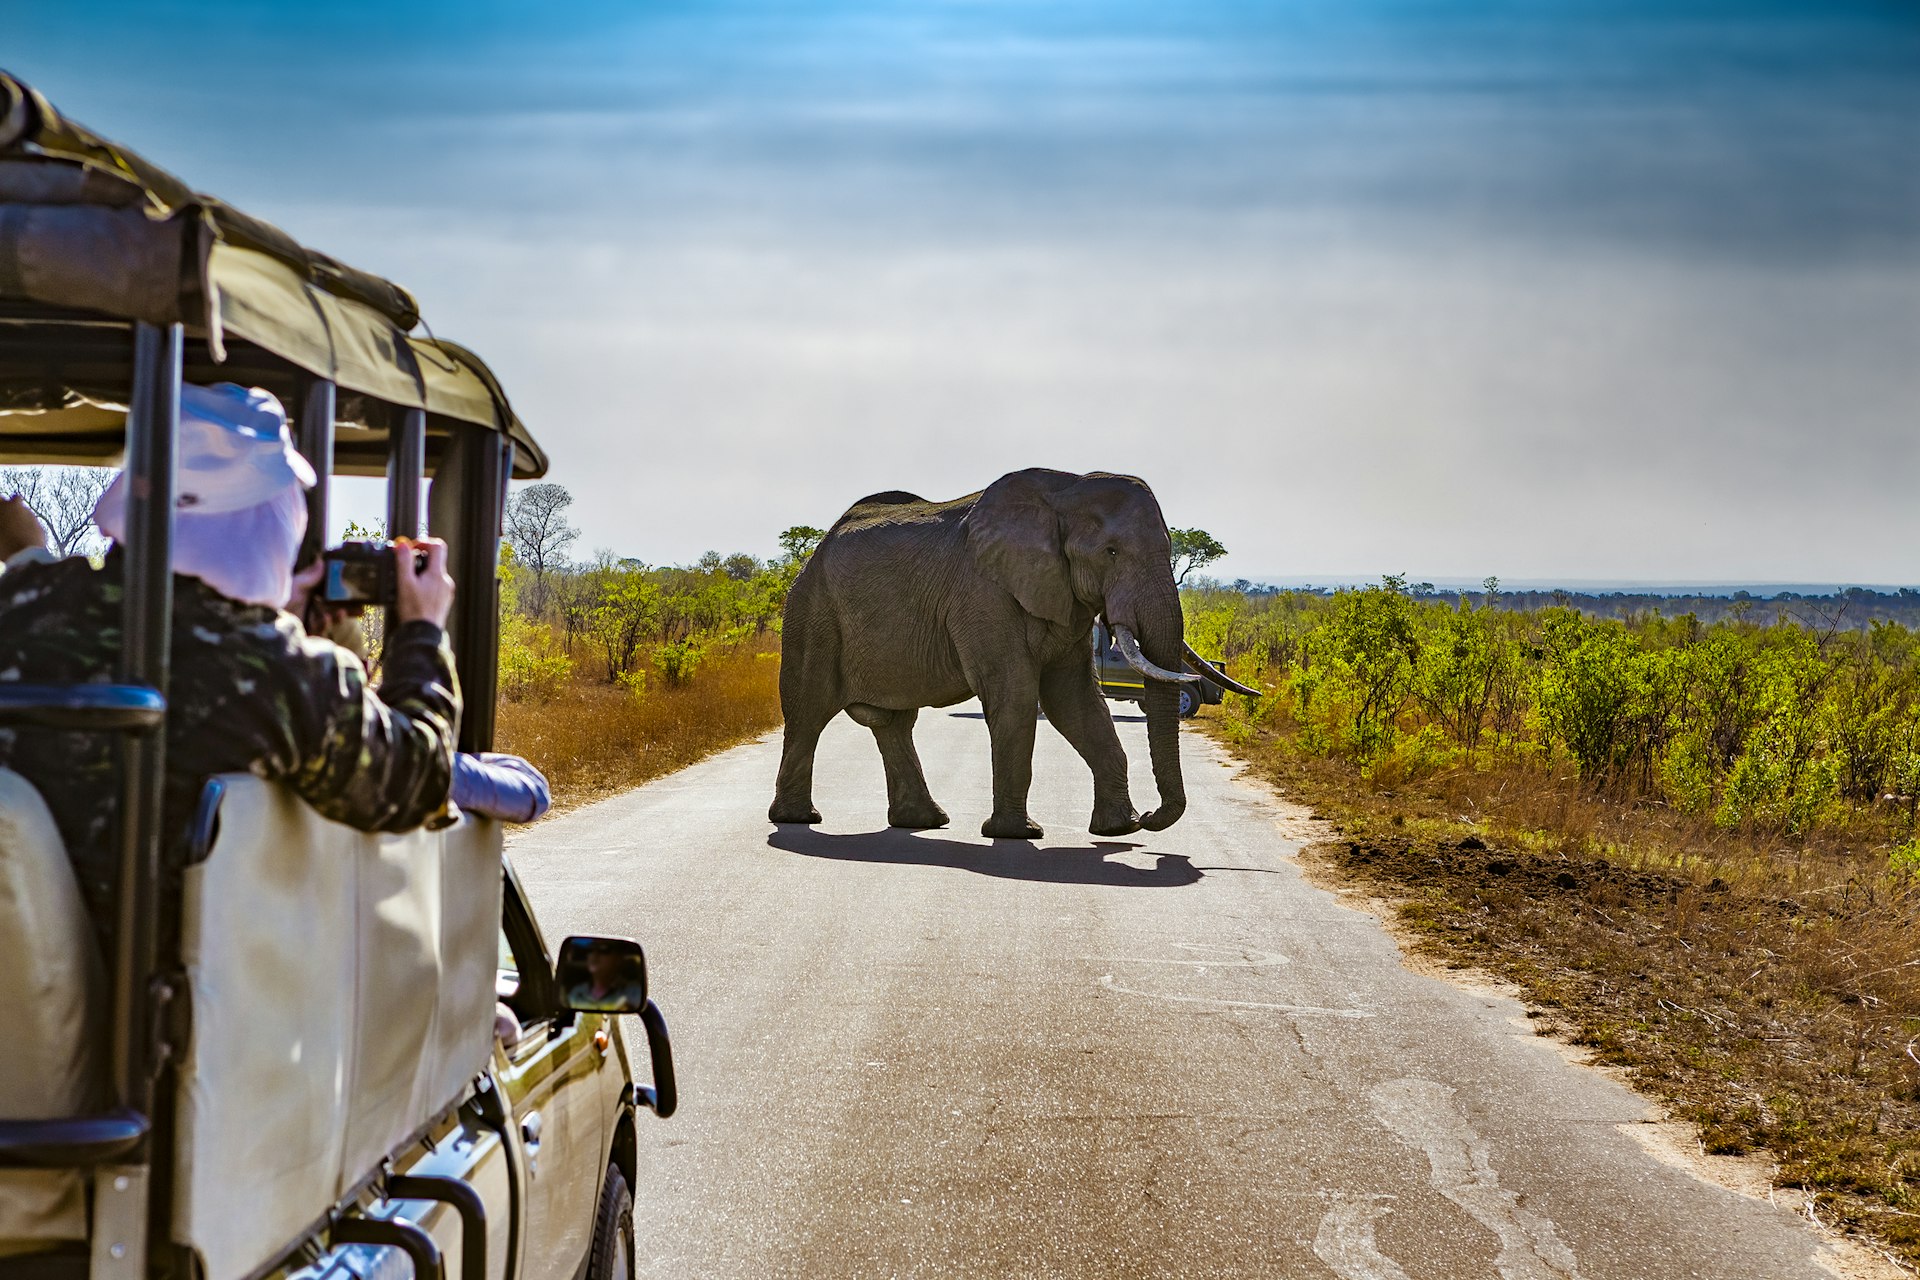 People in a safari jeep taking photos of an elephant in Kruger National Park, South Africa